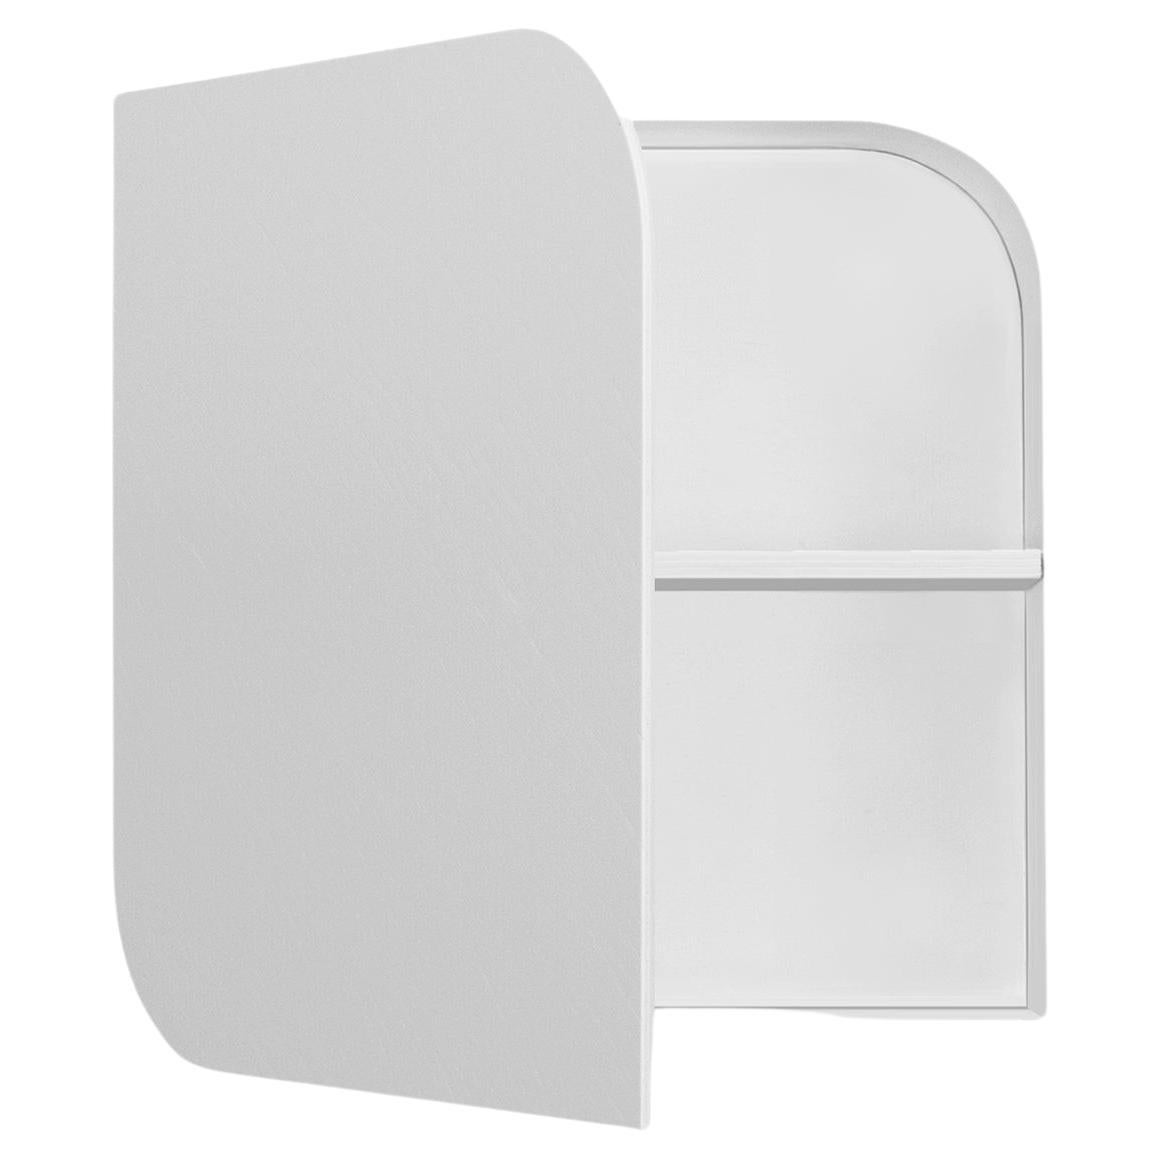 Cielo Wall Cabinet, White